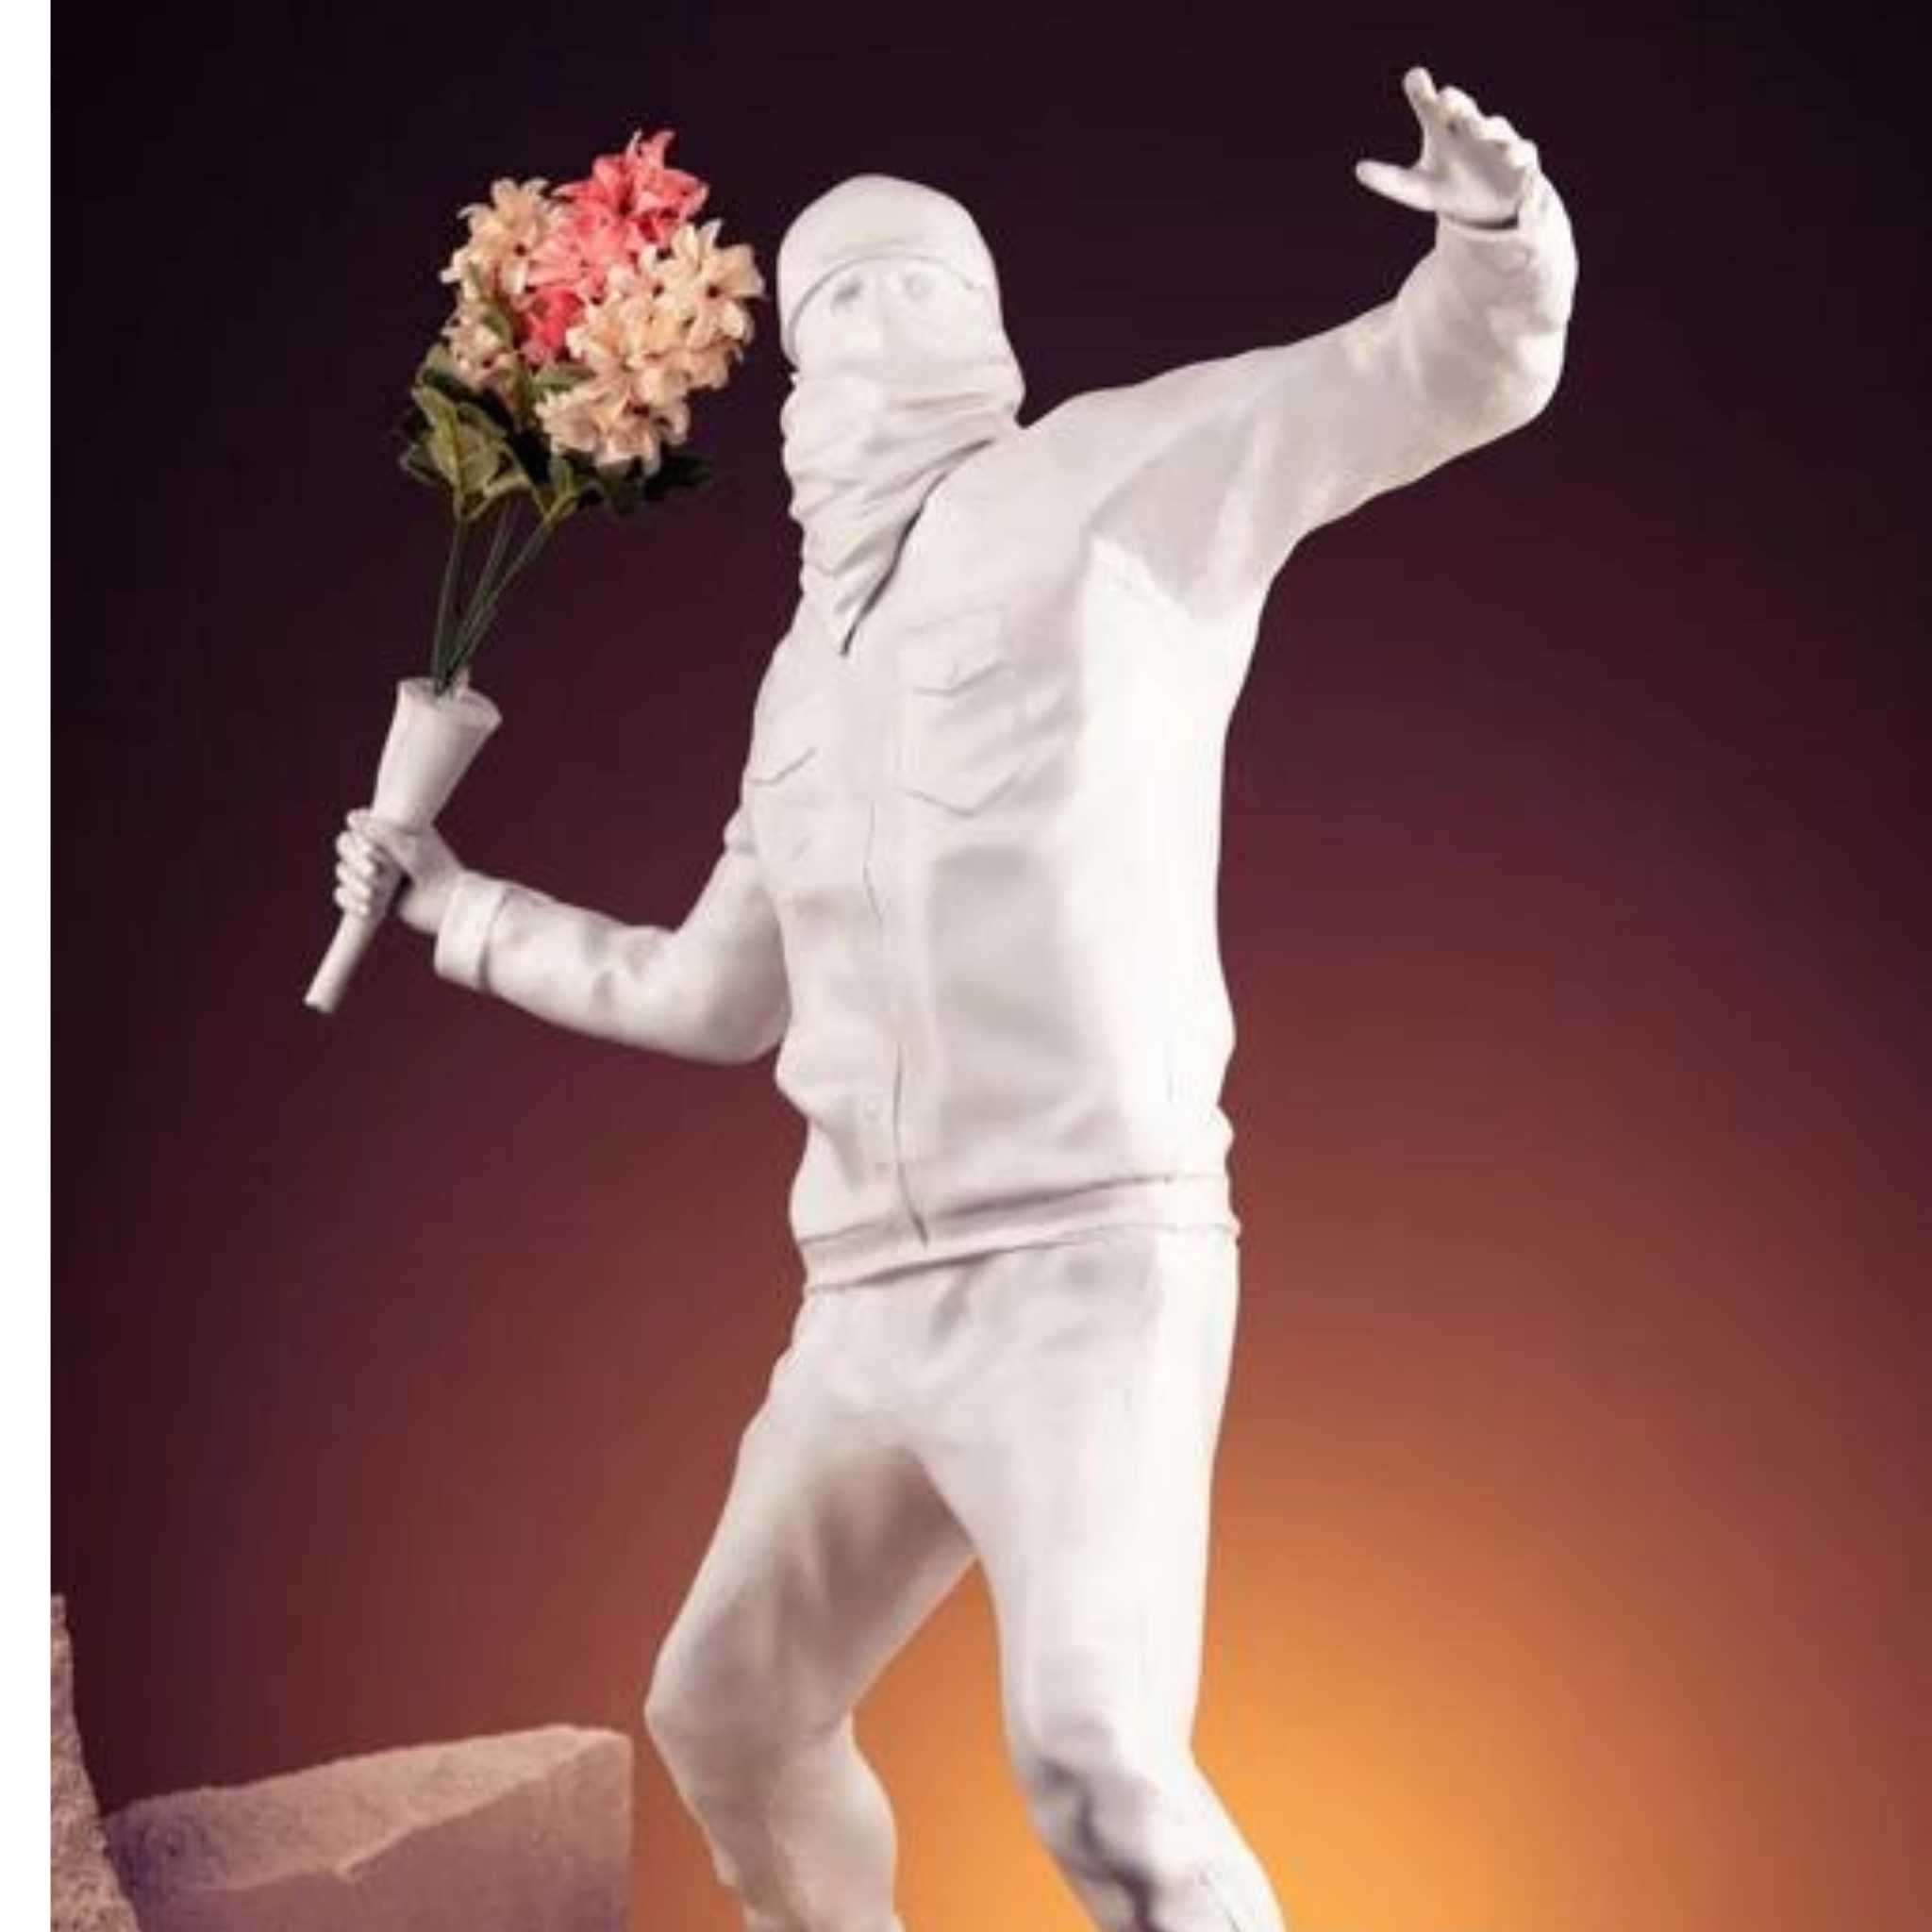 Flower Power: The Banksy Sculpture with Throwing Man